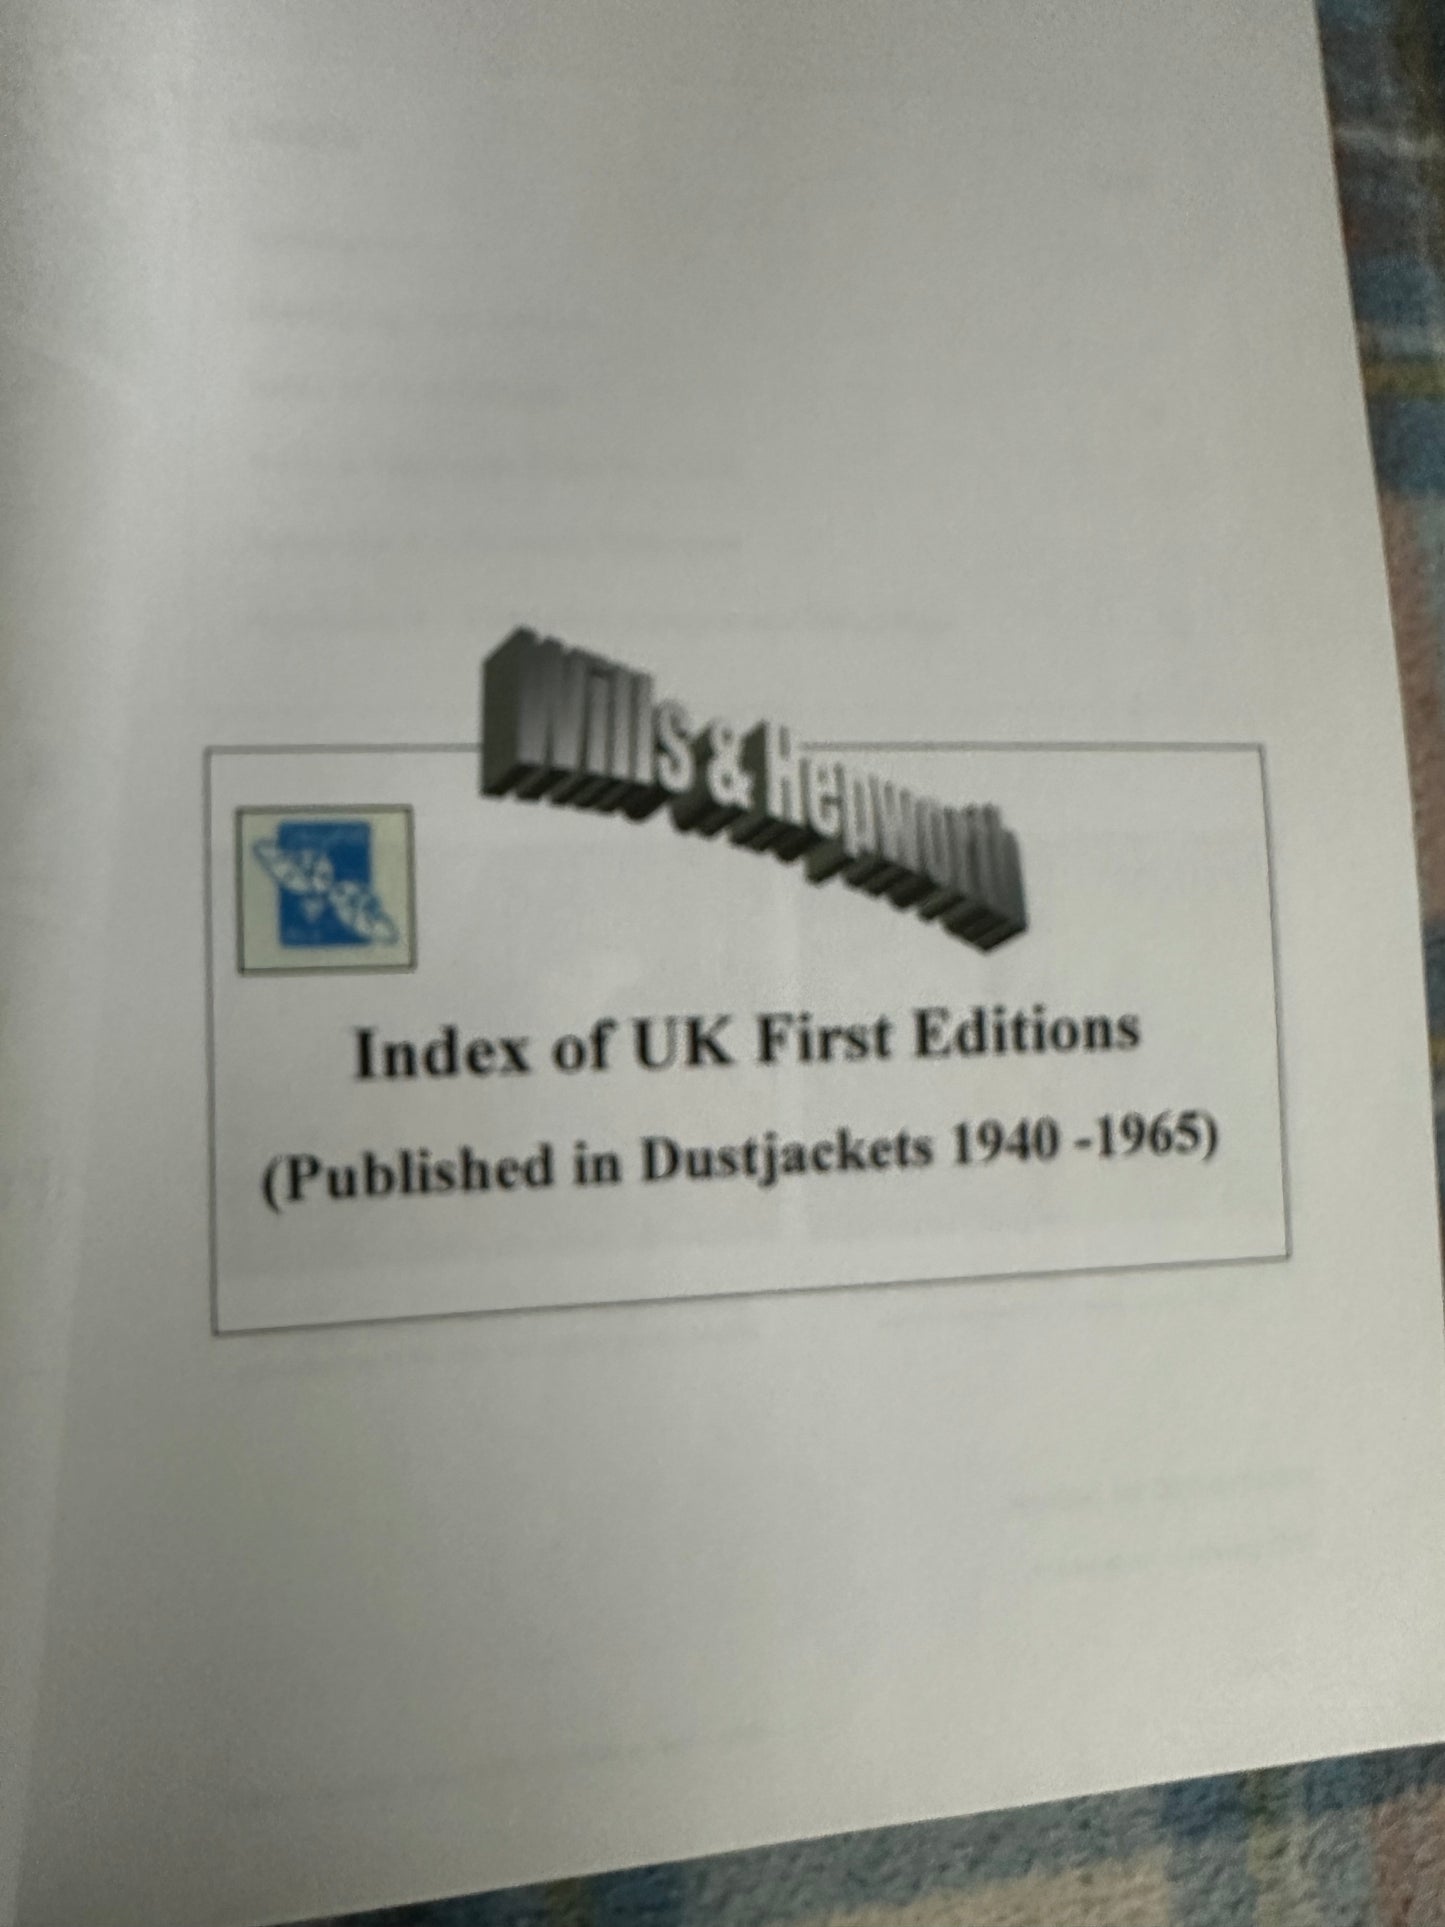 Ladybird Wills & Hepworth Index Of UK First Editions(Published in Dust Jackets 1940-1965) Private printing